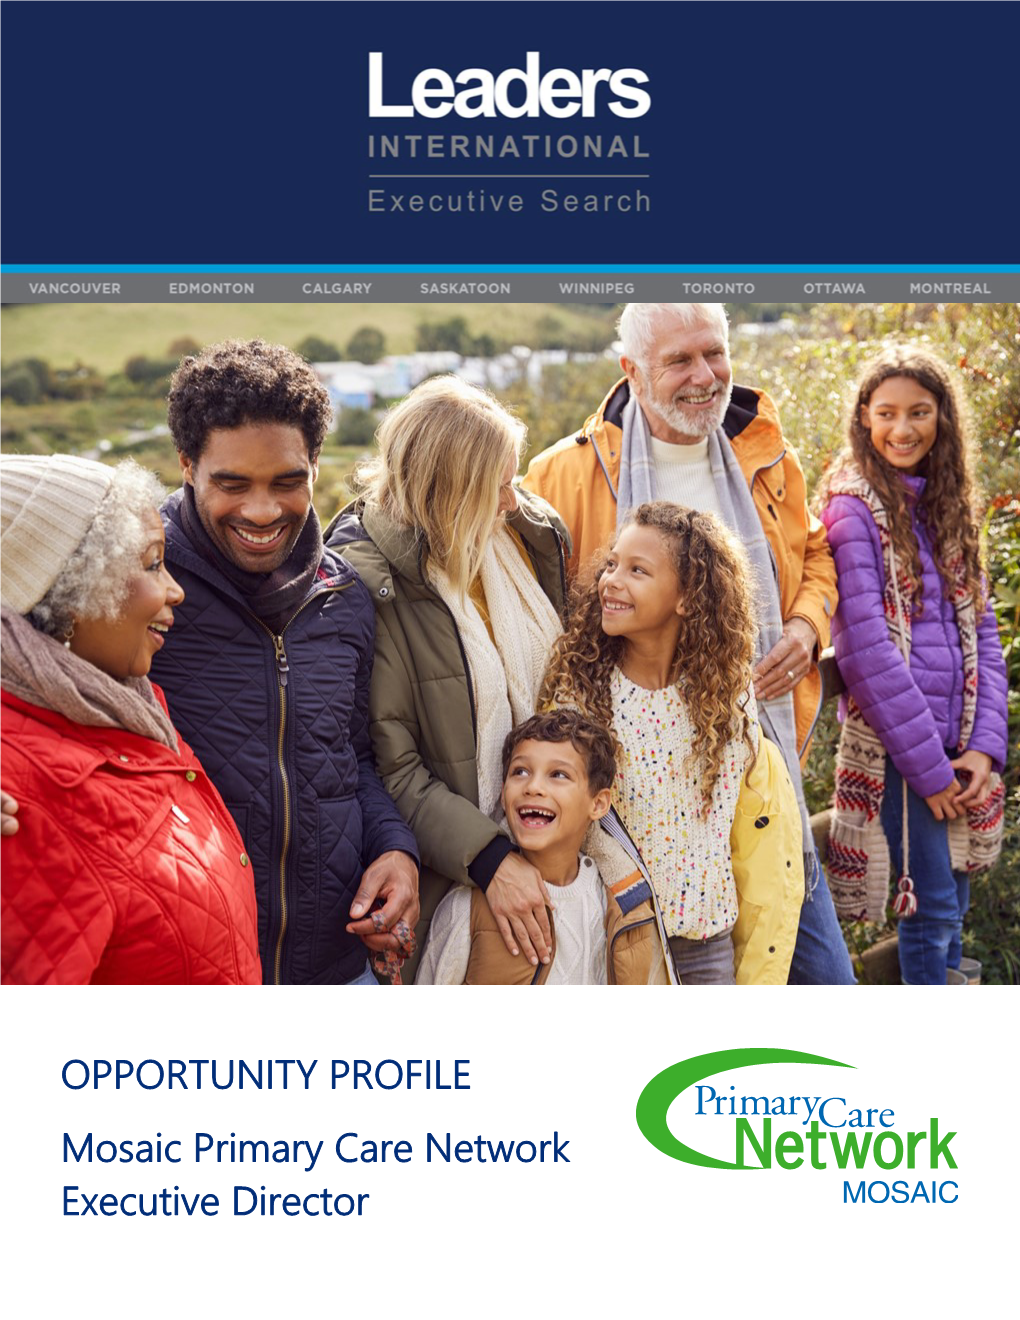 OPPORTUNITY PROFILE Mosaic Primary Care Network Executive Director